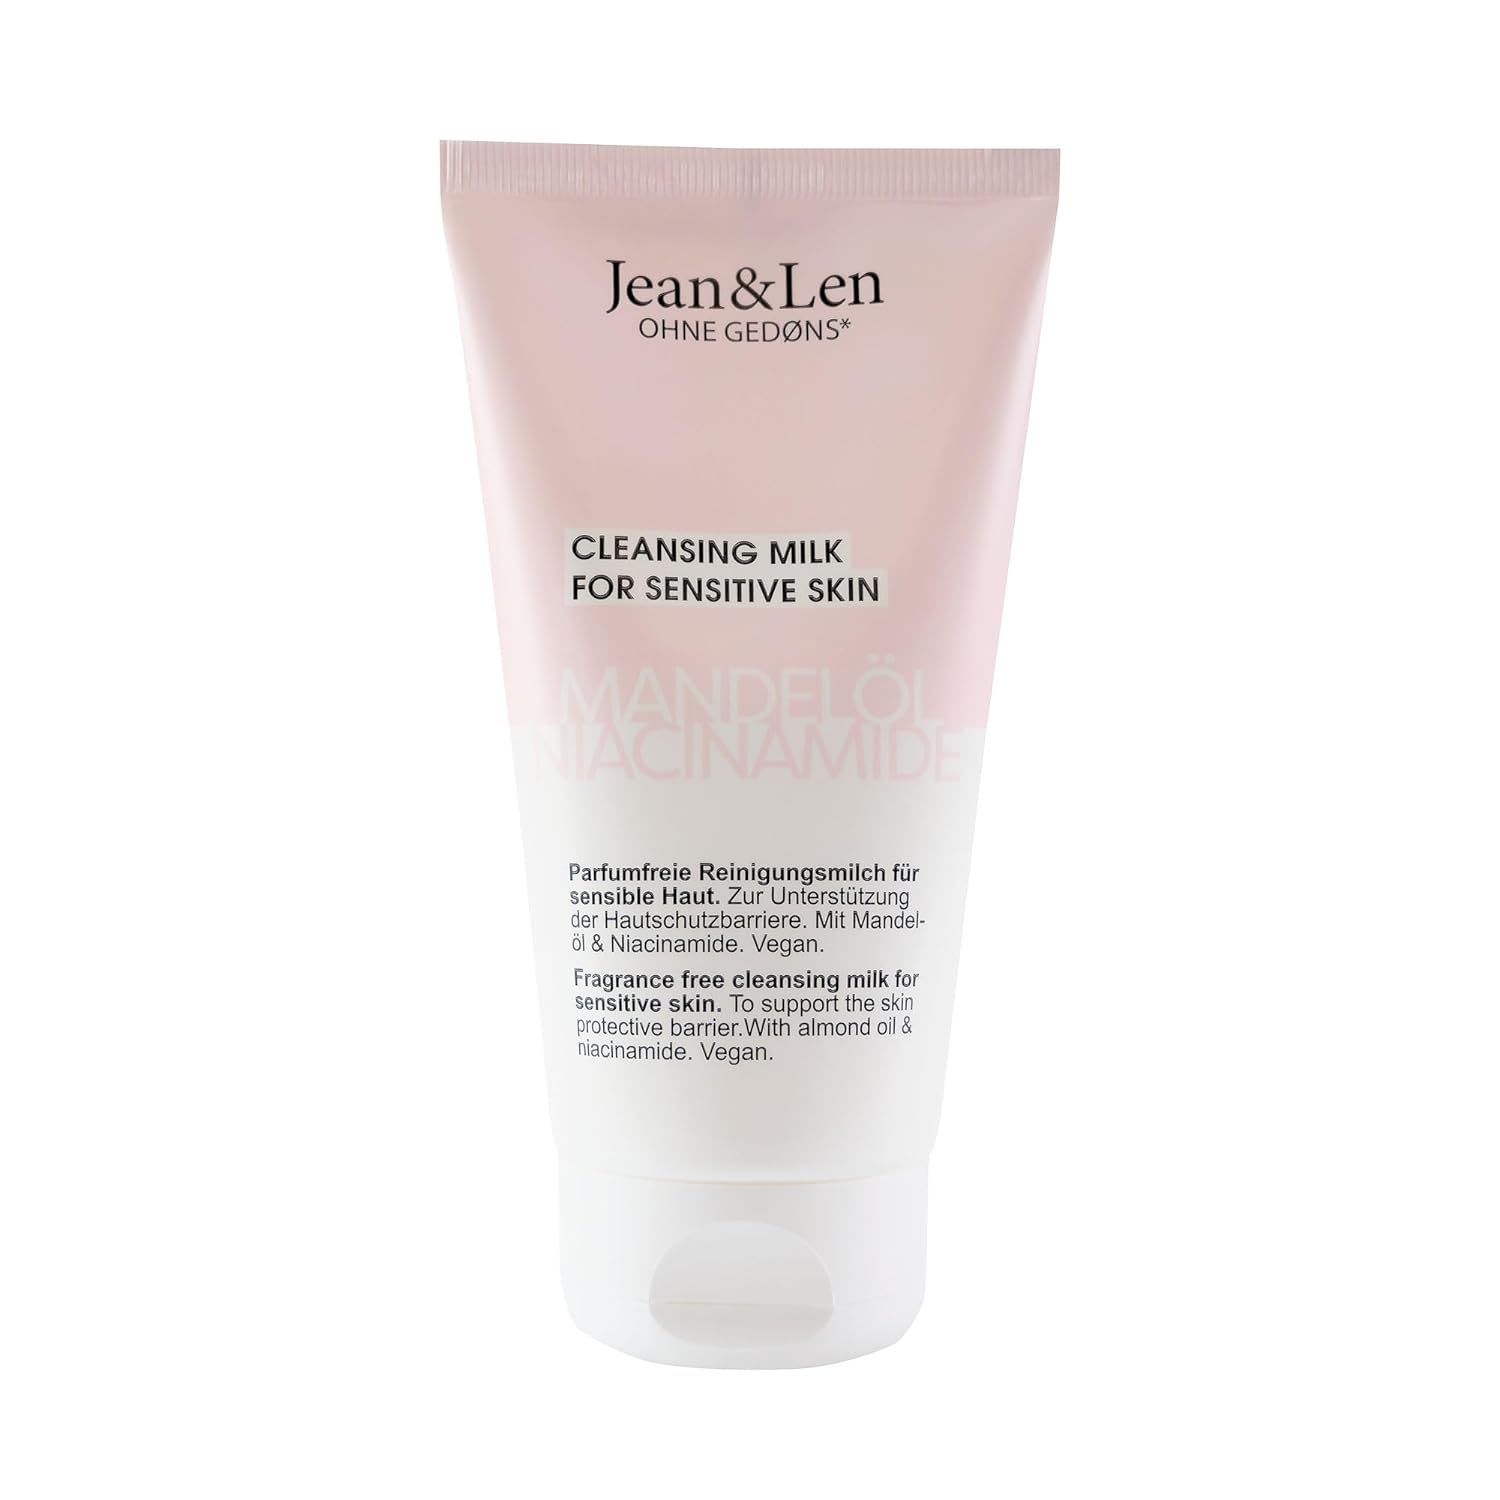 Jean & Len Fragrance-Free Cleansing Milk Almond Oil & Niacinamide, Particularly Mild Cleansing, for Sensitive Skin, Removes Makeup Residues & Dirt Particles, Parabens & Silicones, Vegan, 150 ml